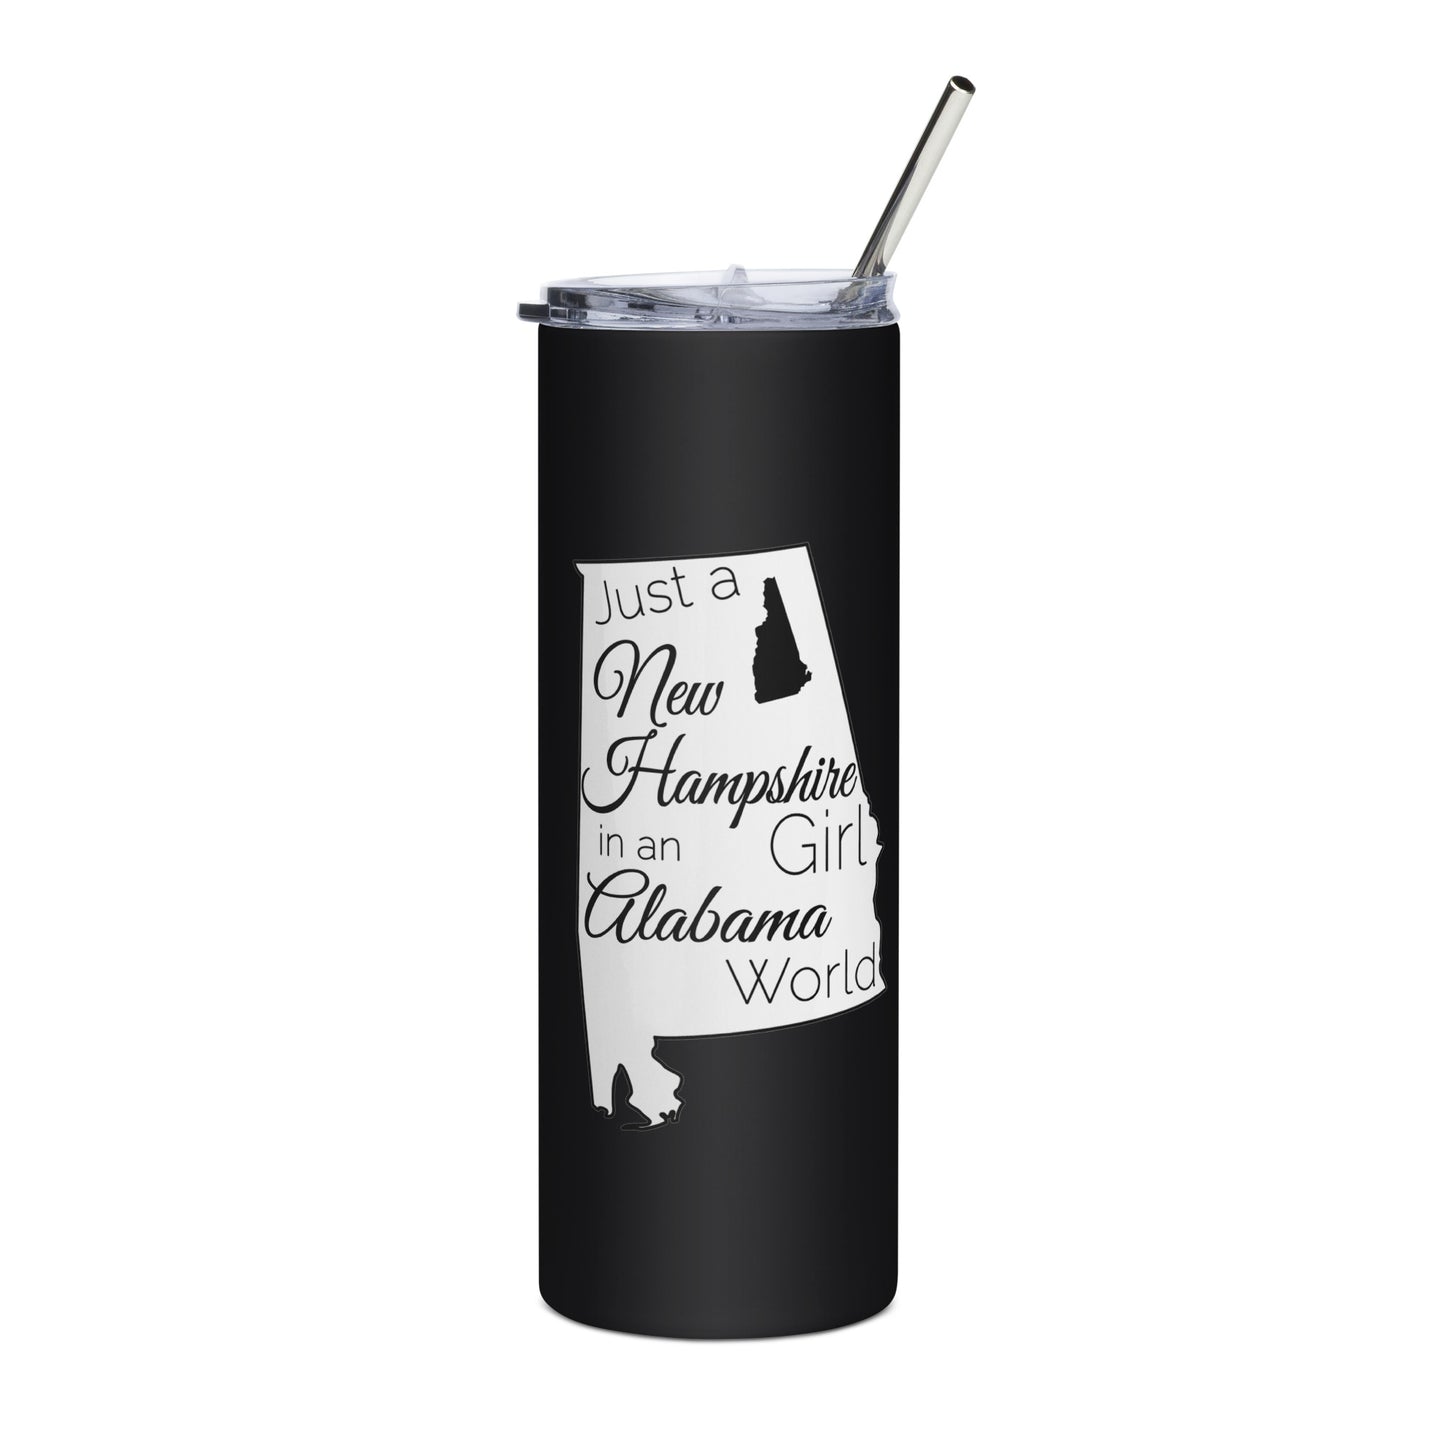 Just a New Hampshire Girl in an Alabama World Stainless steel tumbler